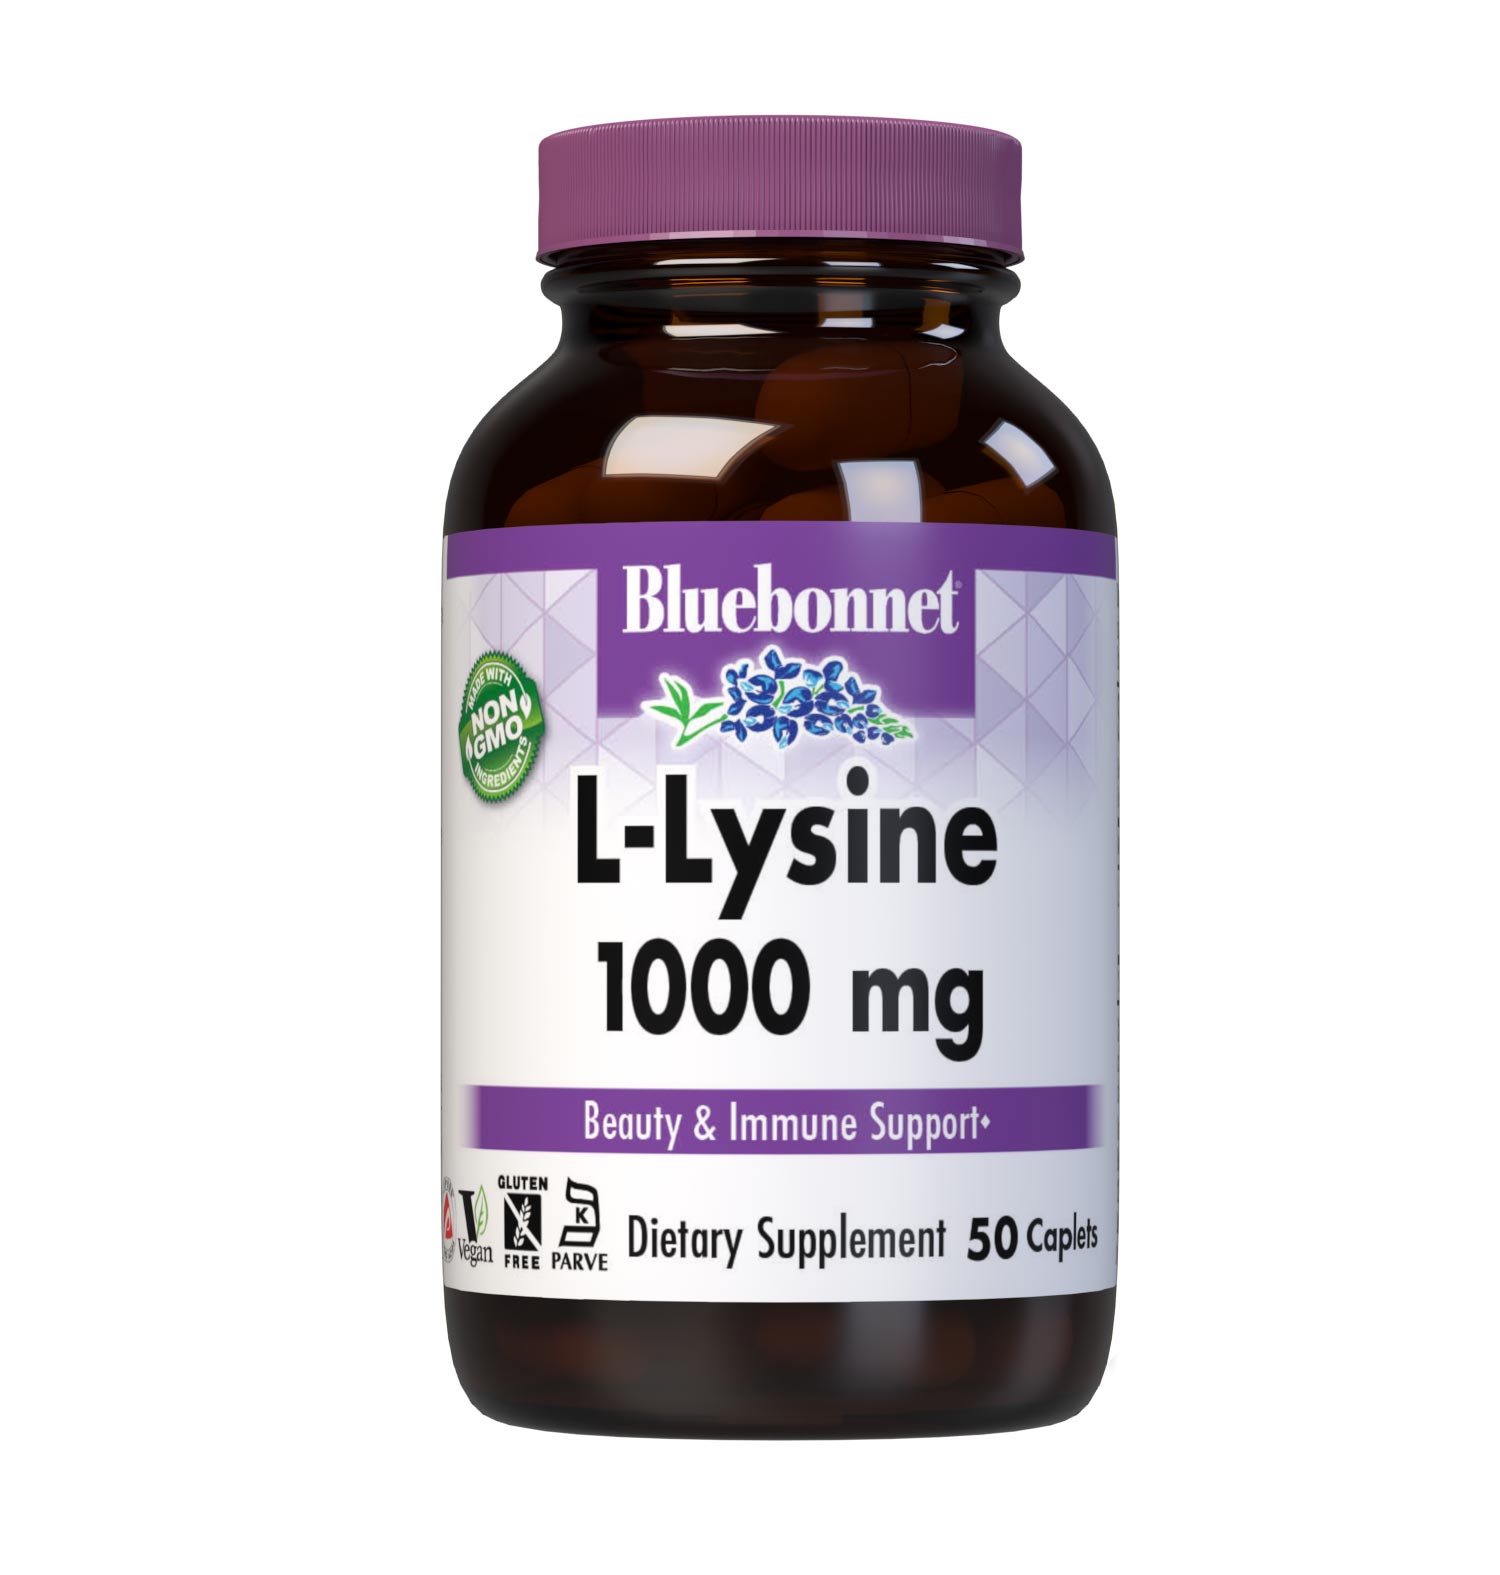 Bluebonnet’s L-Lysine 1000 mg 50 Caplets are formulated with the free-form amino acid L-lysine HCI in its crystalline form from Ajinomoto to help support immune function and collagen synthesis. #size_50 count